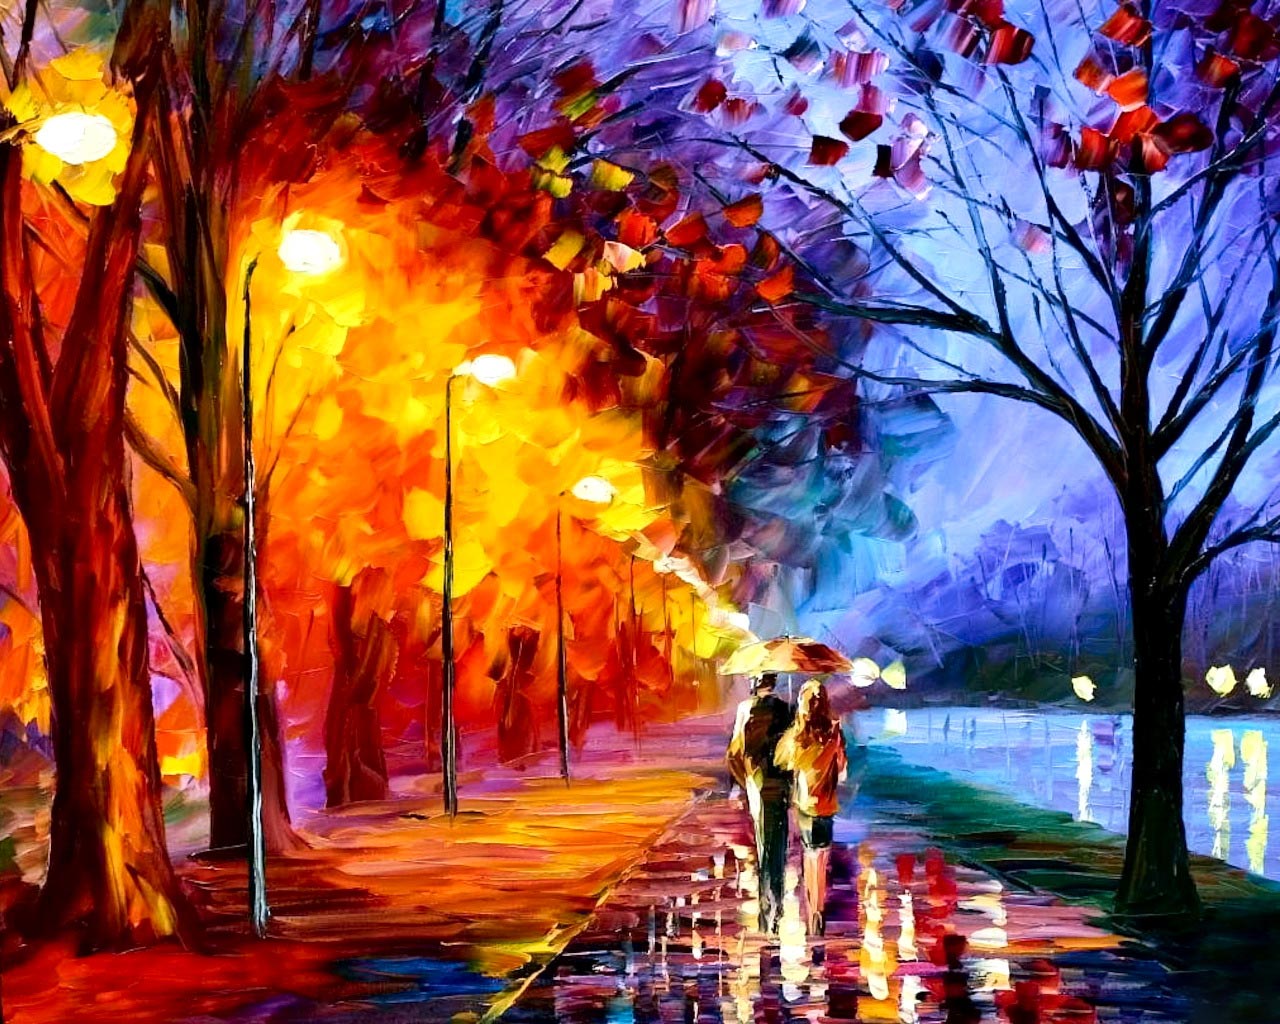 Autumn Oil Painting Wallpaper High Quality WallpapersWallpaper 1280x1024